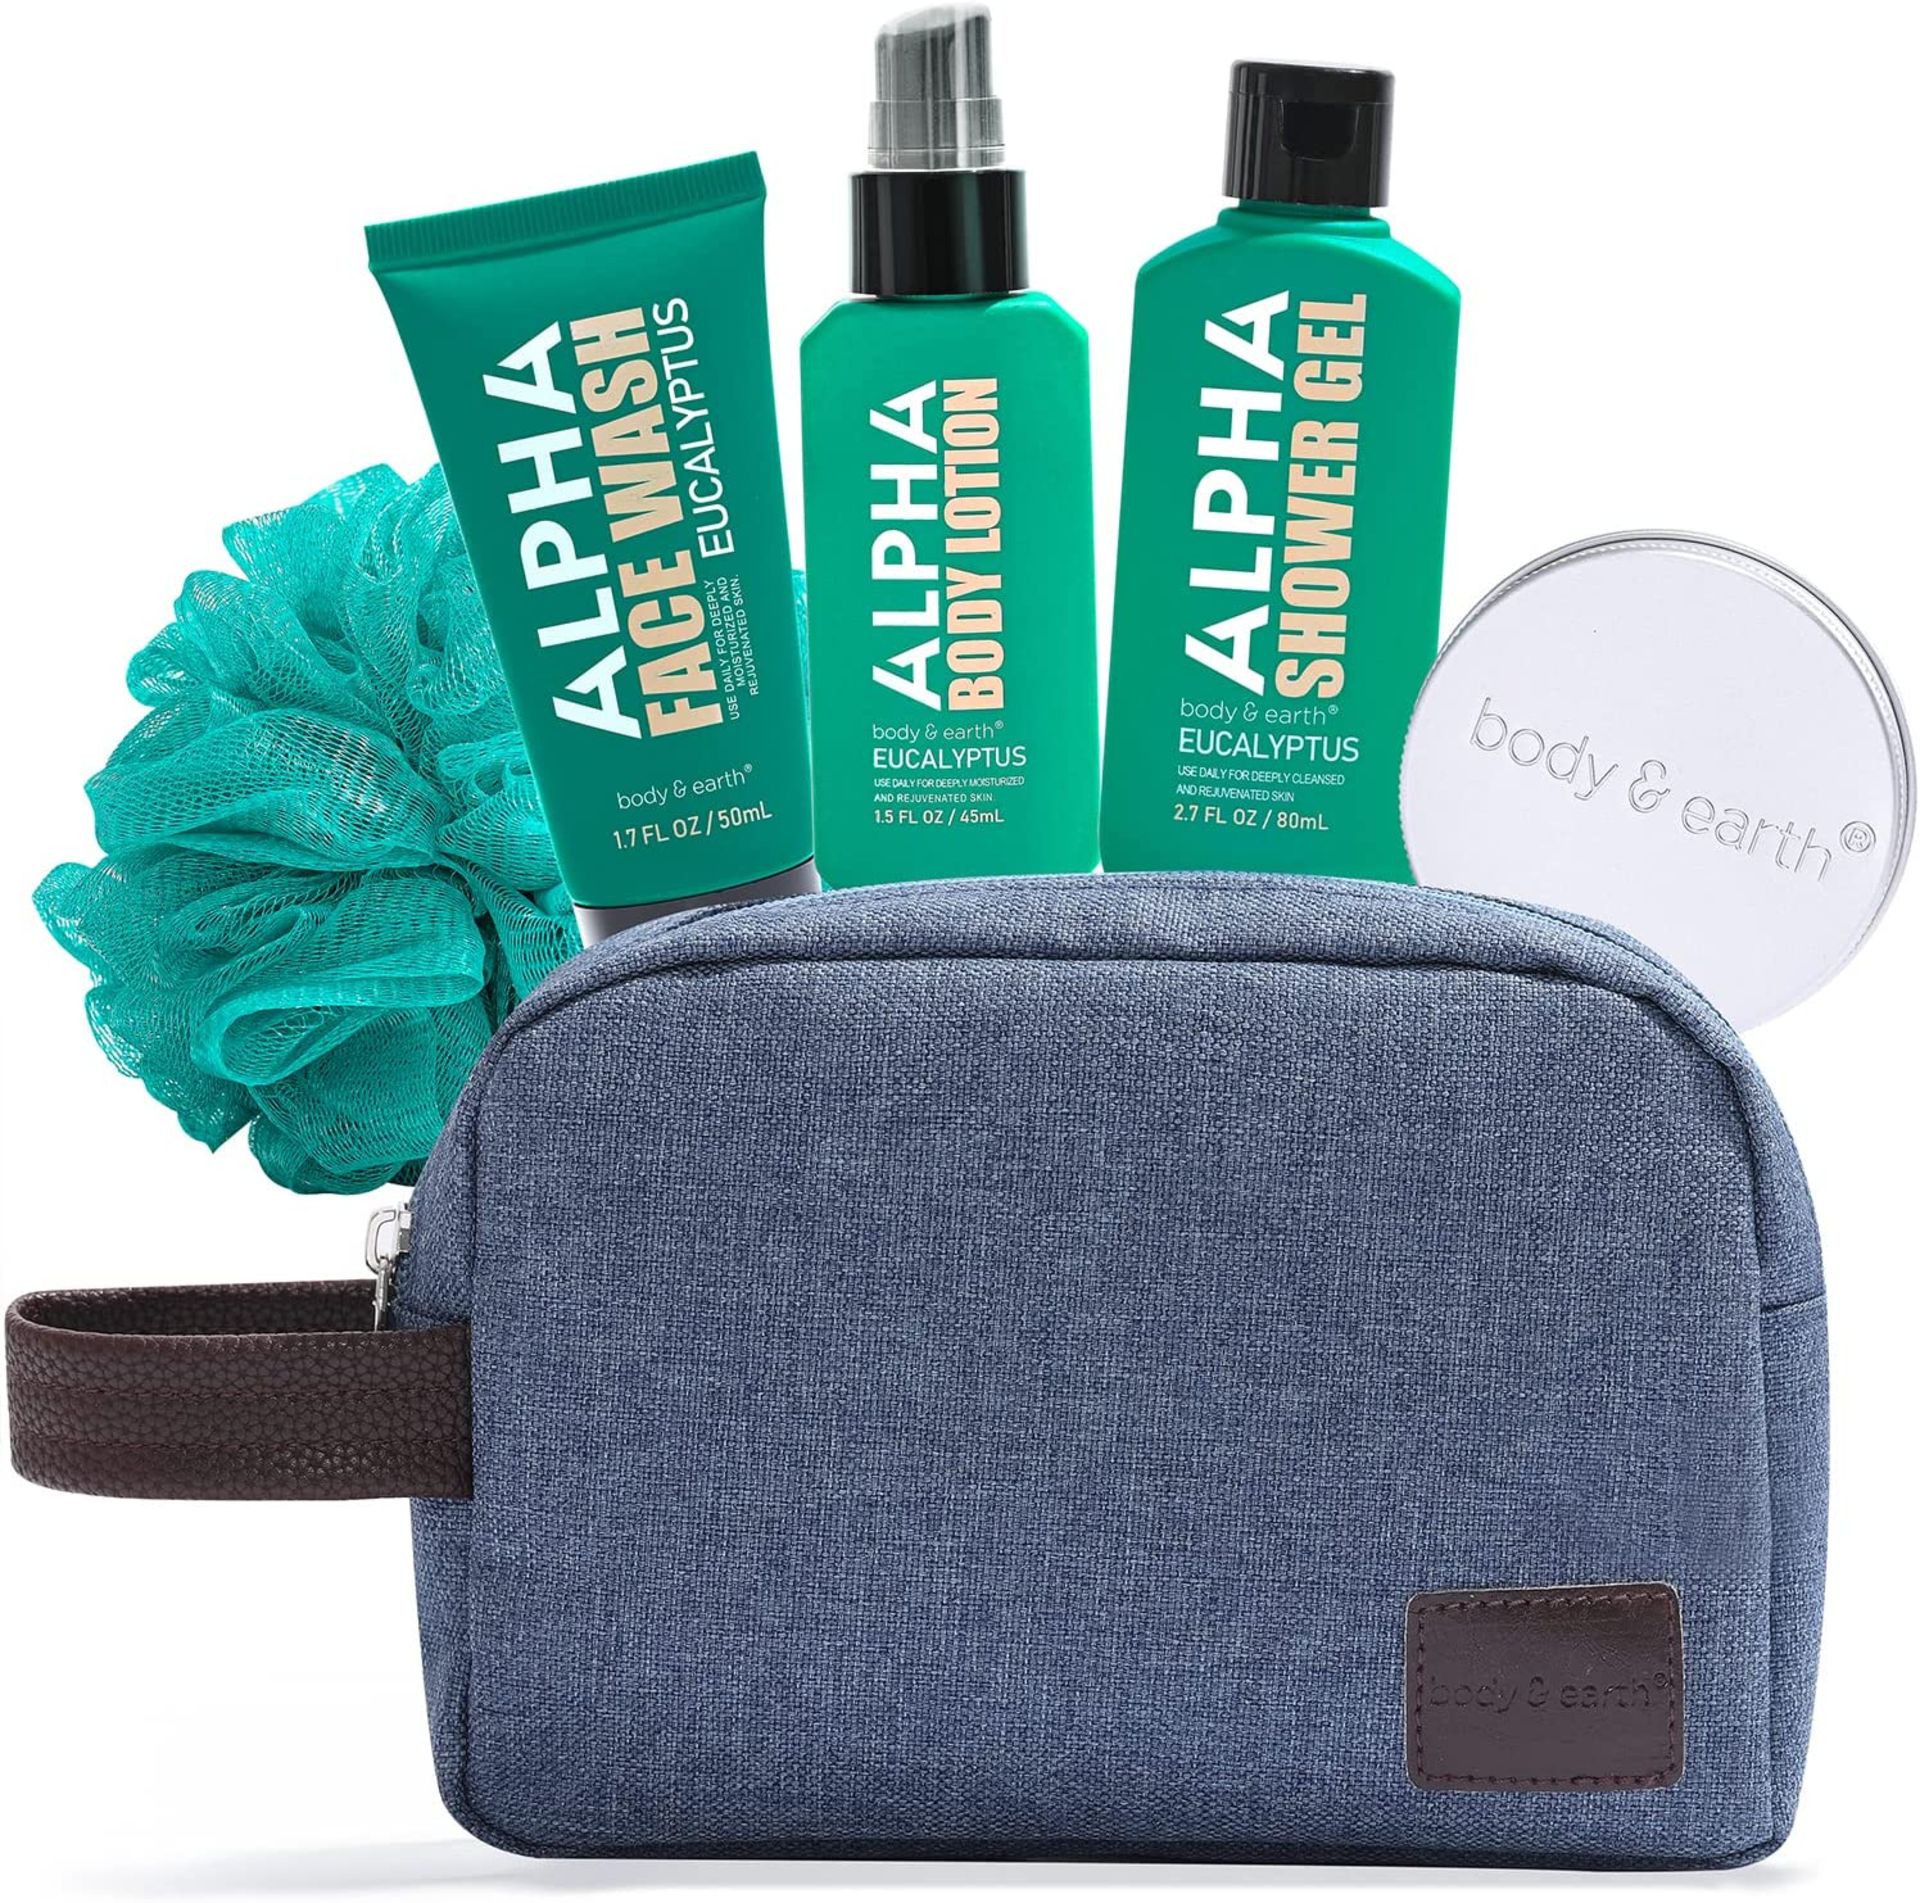 6 X NEW PACKAGED Alpha - Care For Your Skin - Body & Earth. Just For You 6 Piece Gift Sets (SKU:BE-